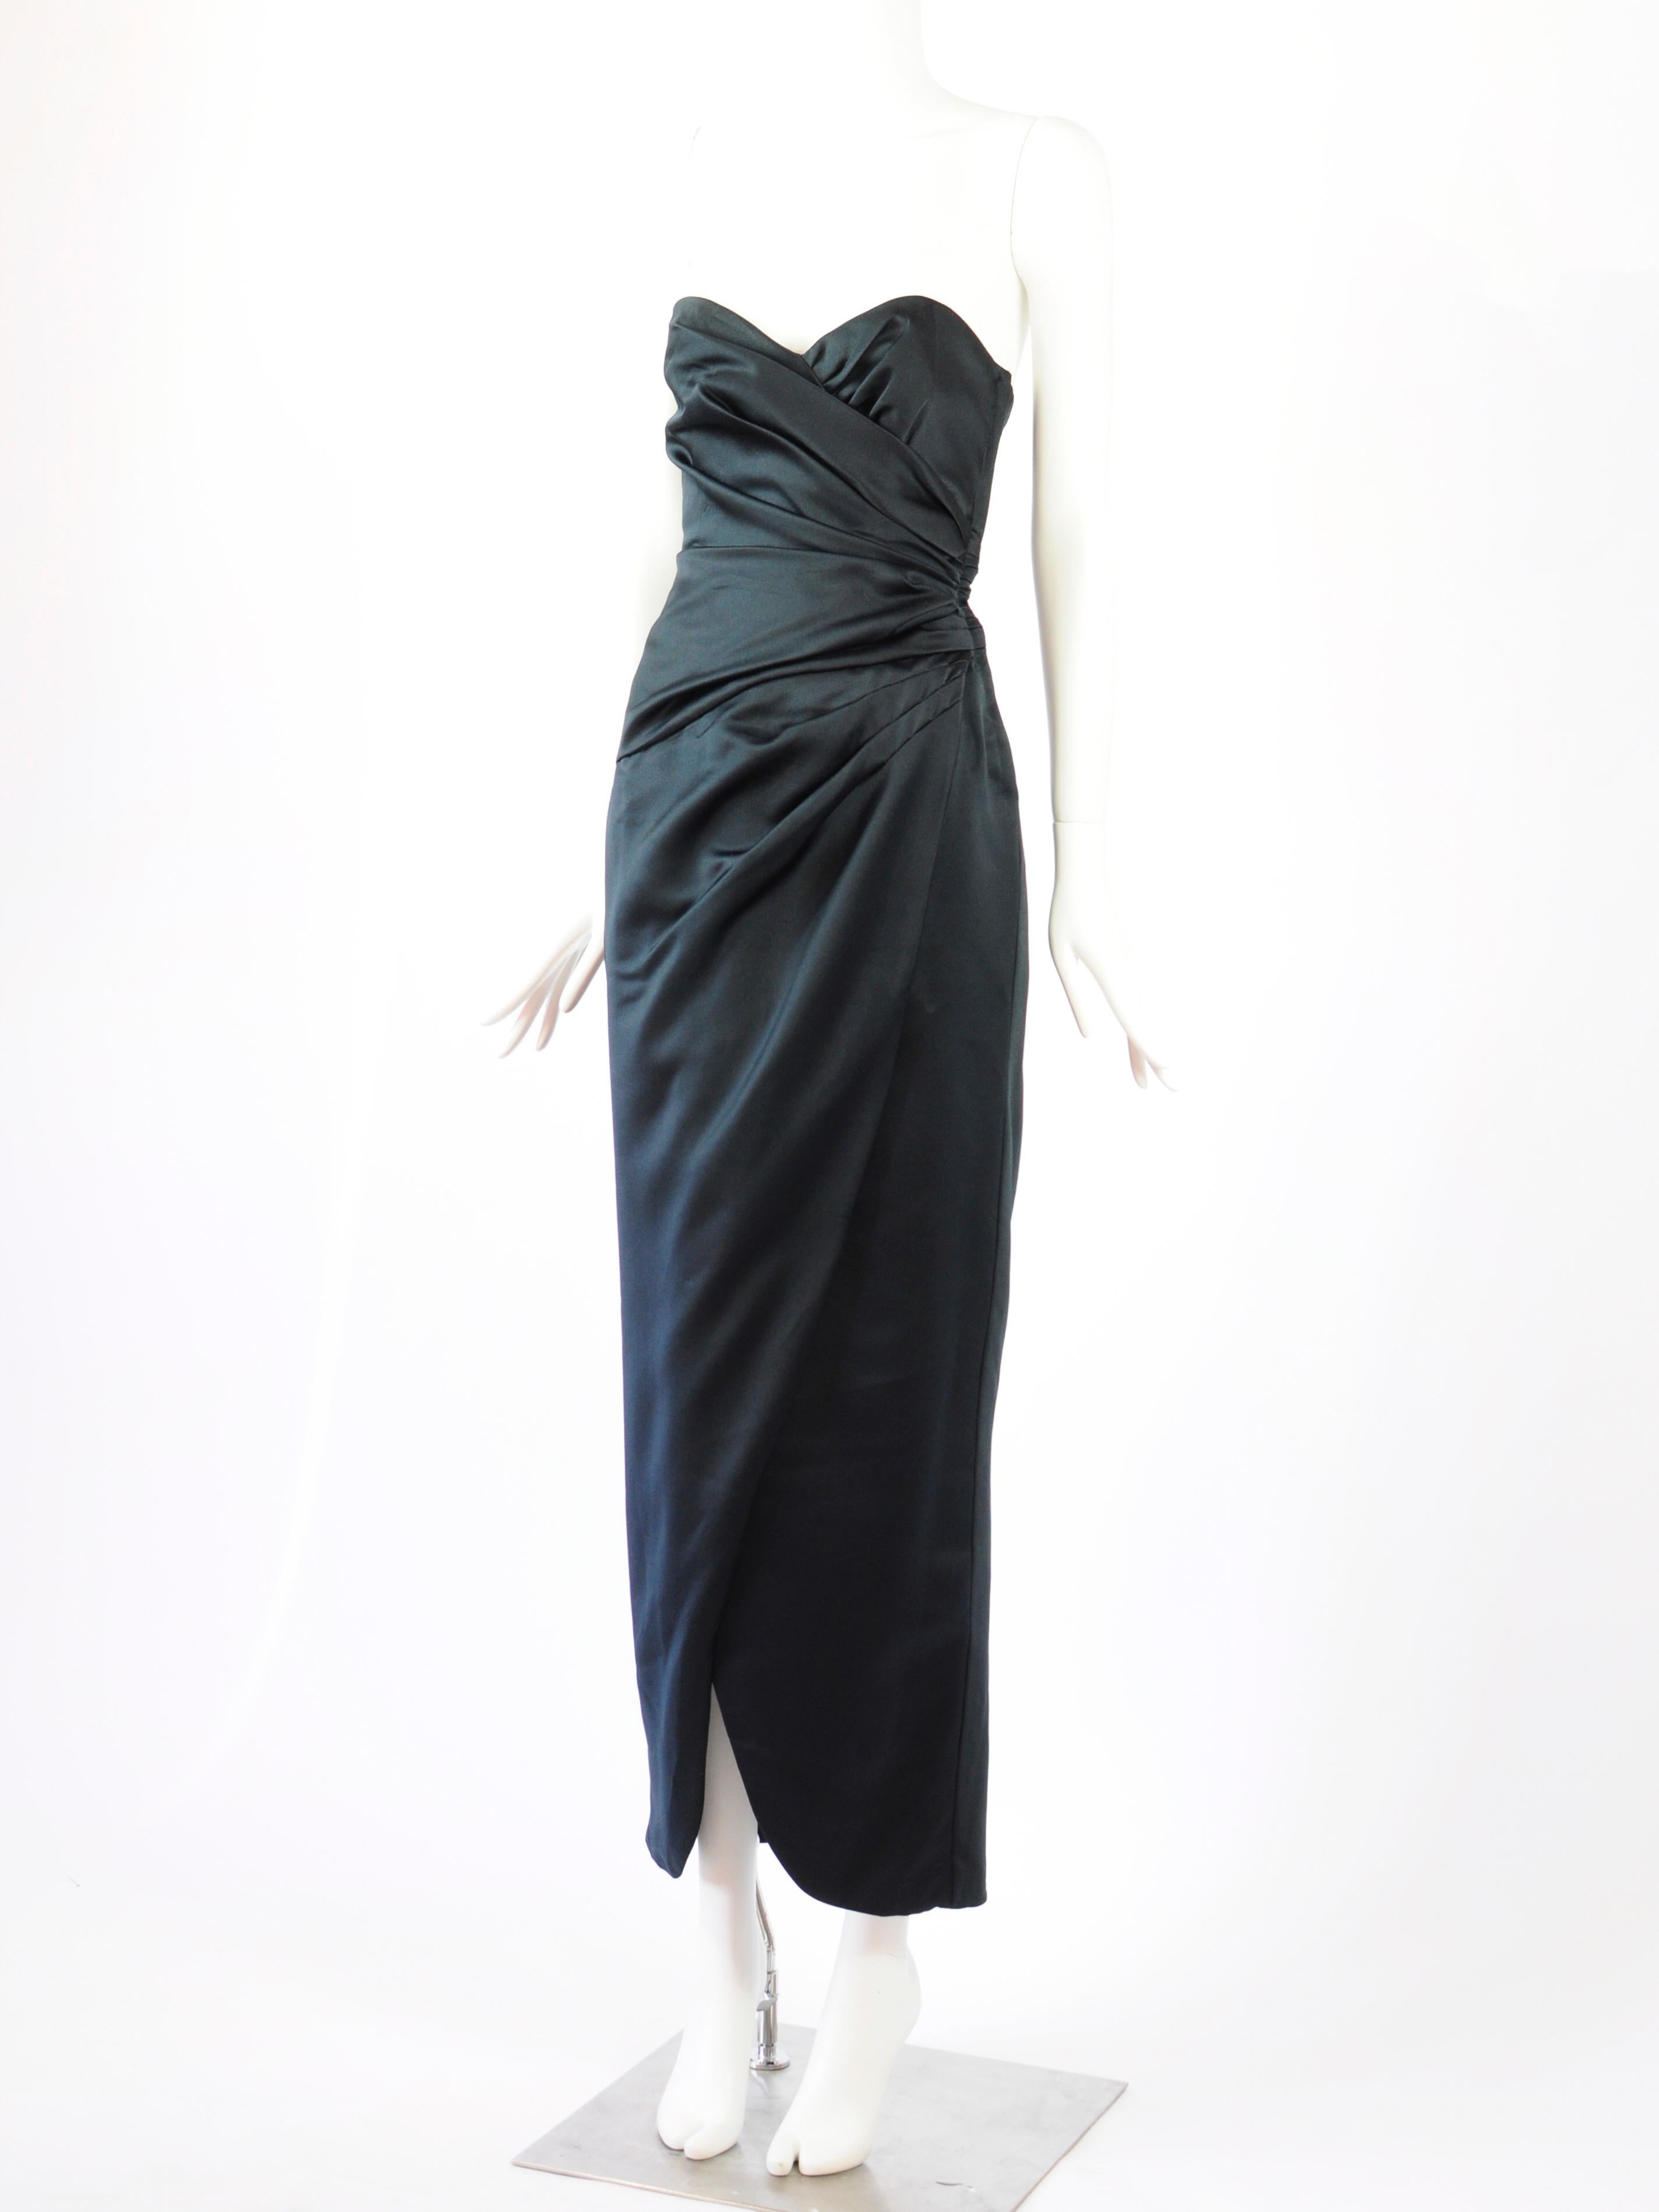 Victor Costa strapless dress in black structured, draped satin from the 1980s. Has a very old hollywood glamourous feel to it. The draping creates an overlap on the skirt which will allow for a cheeky slit effect on the front when moving. There is